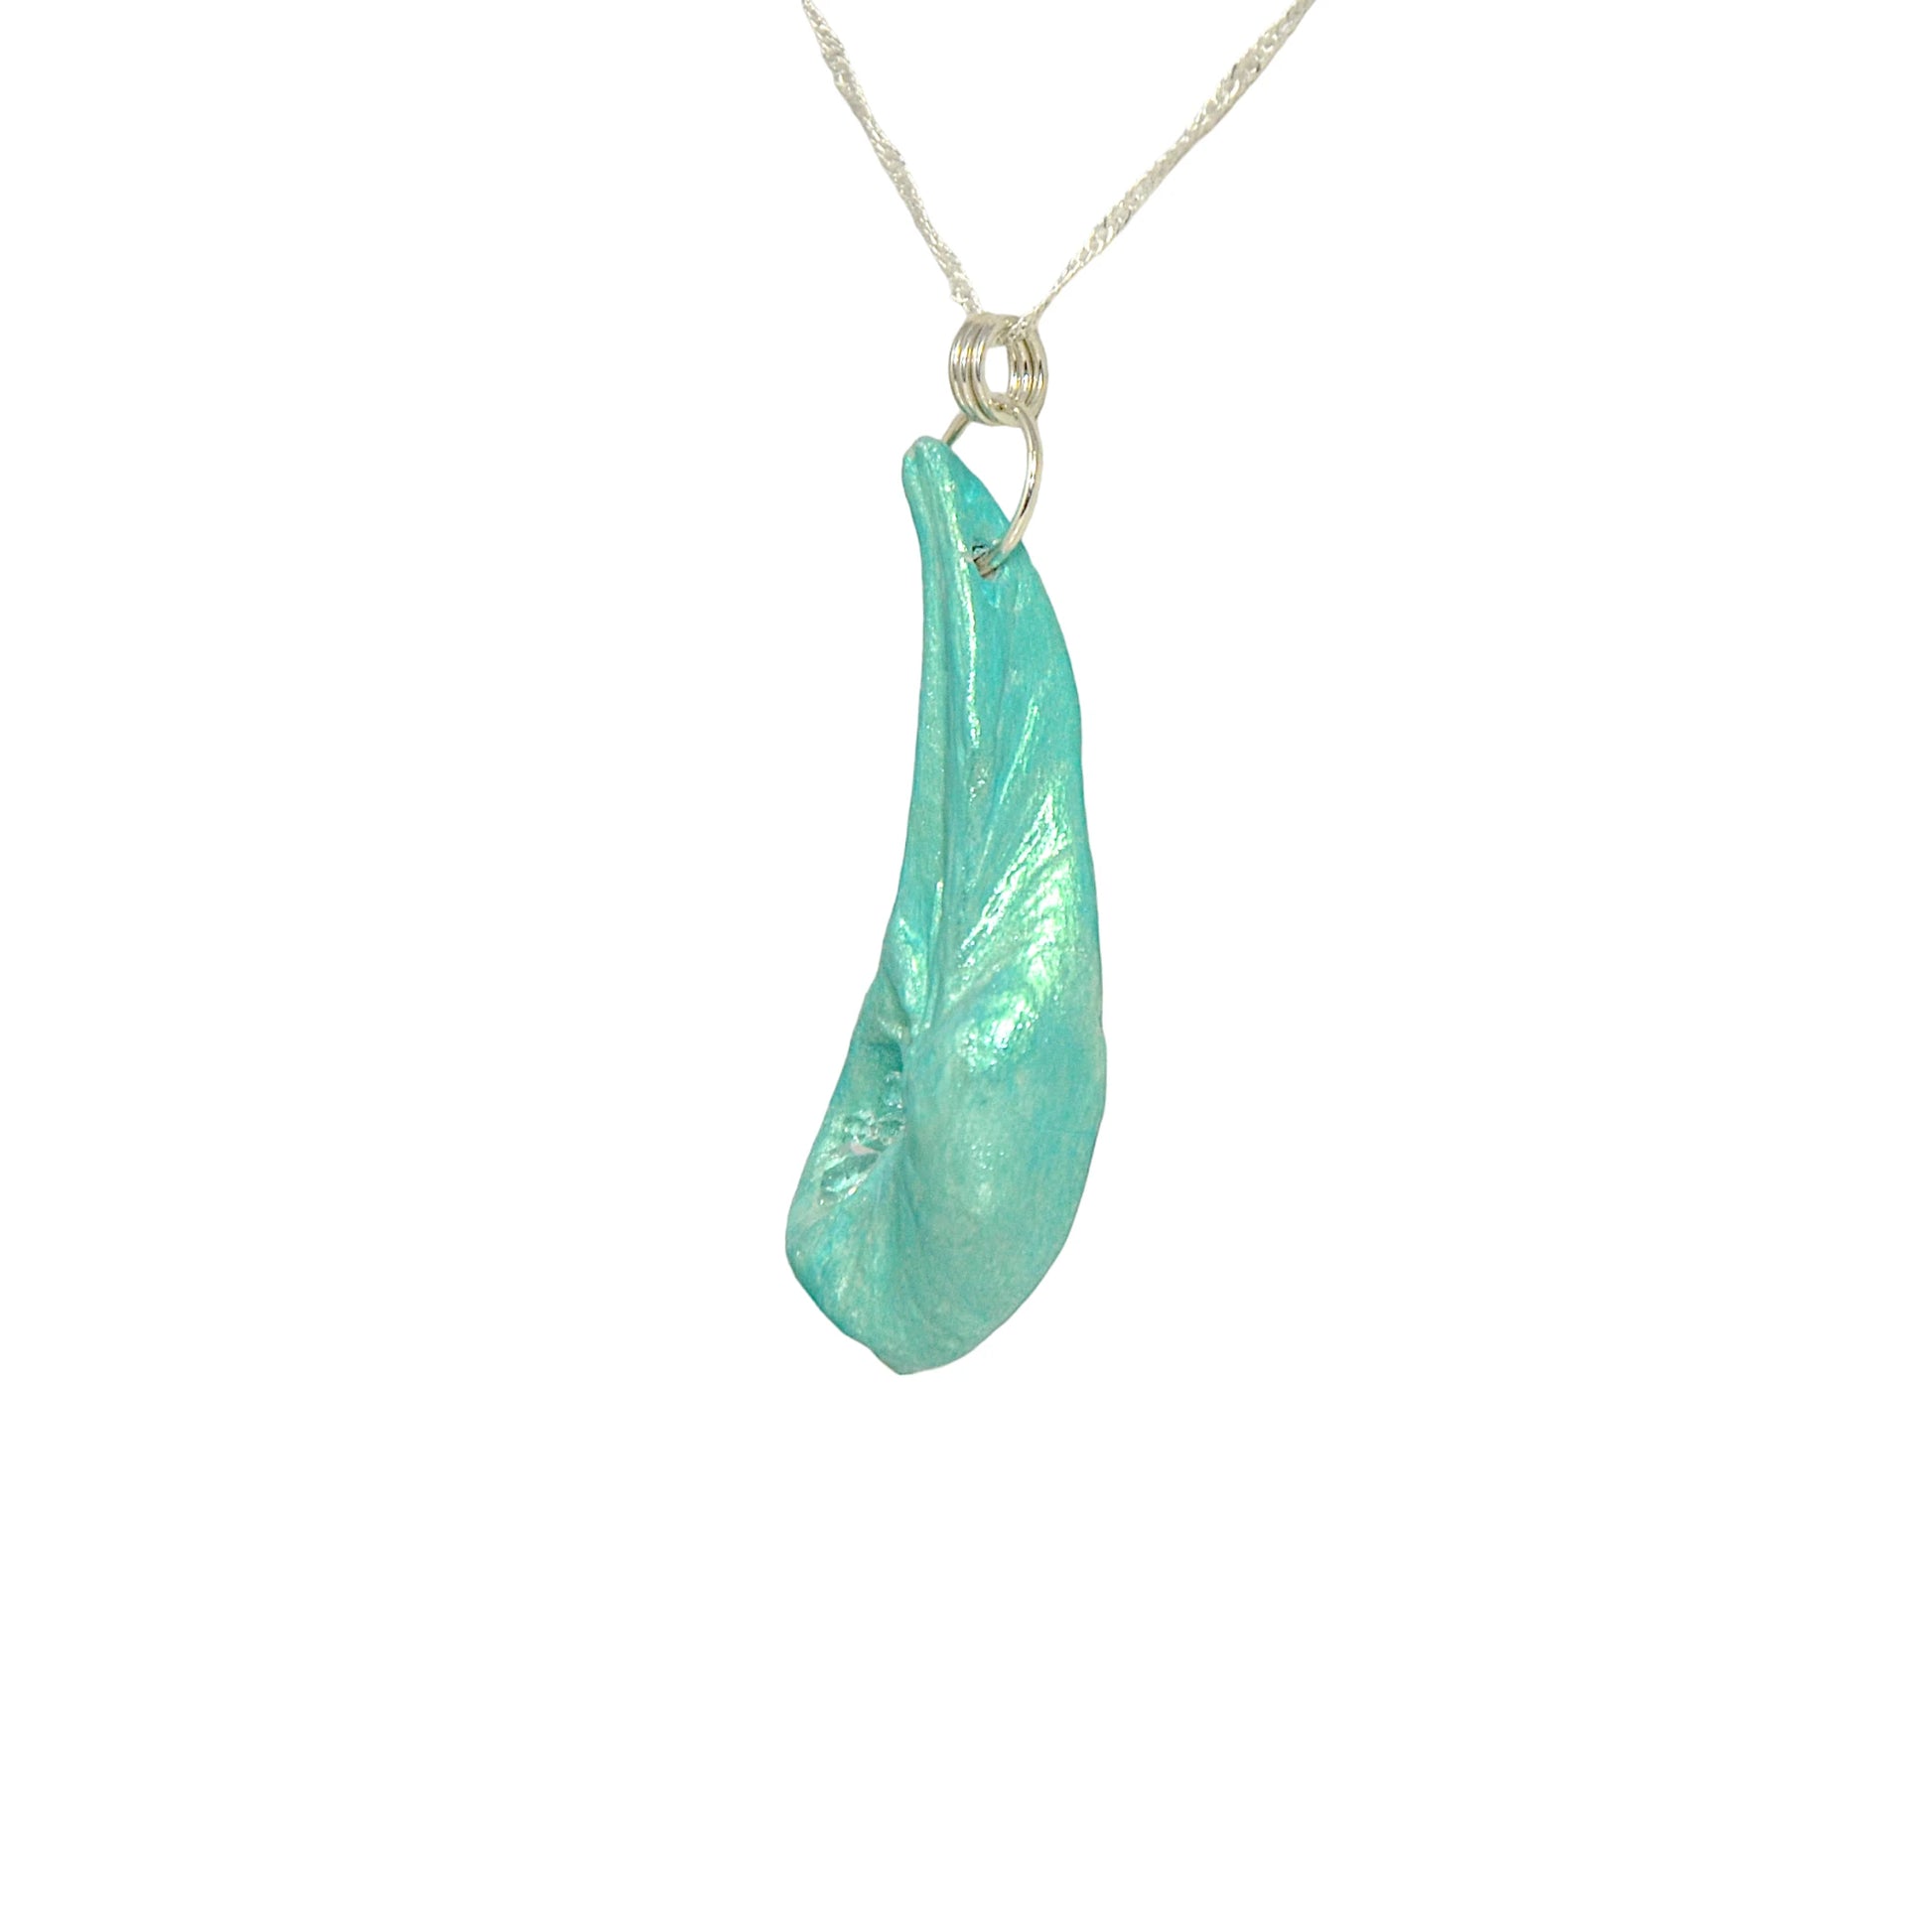 The Cascadia Pendant created with a natural seashell from the beaches of Vancouver Island.  The seashell is turquoise and has high quality herkimer diamonds. is shown turned to show the left side of the pendant.